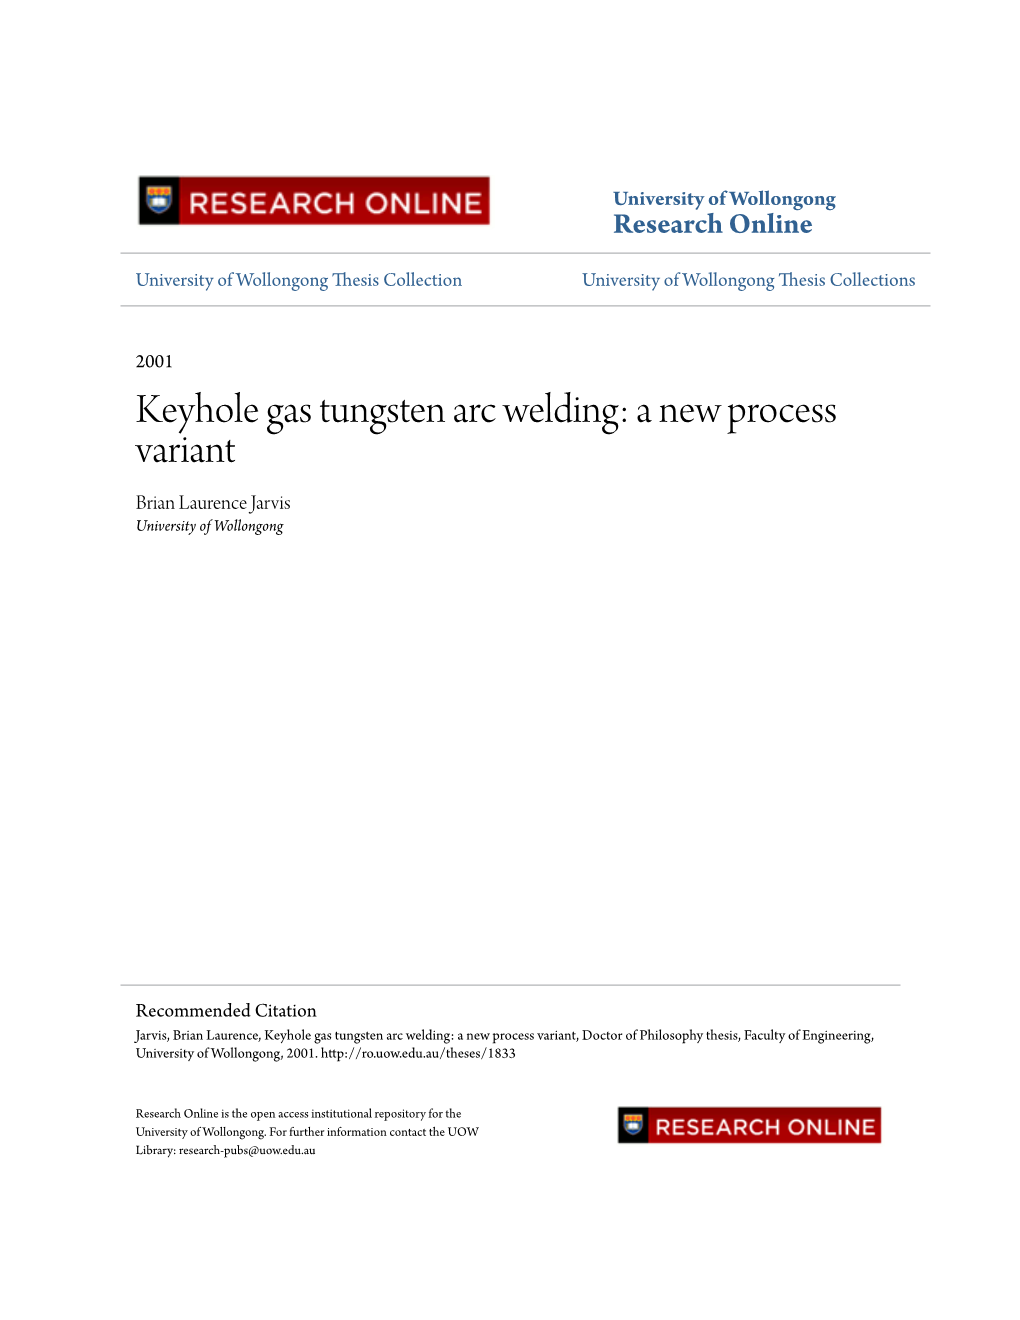 Keyhole Gas Tungsten Arc Welding: a New Process Variant Brian Laurence Jarvis University of Wollongong